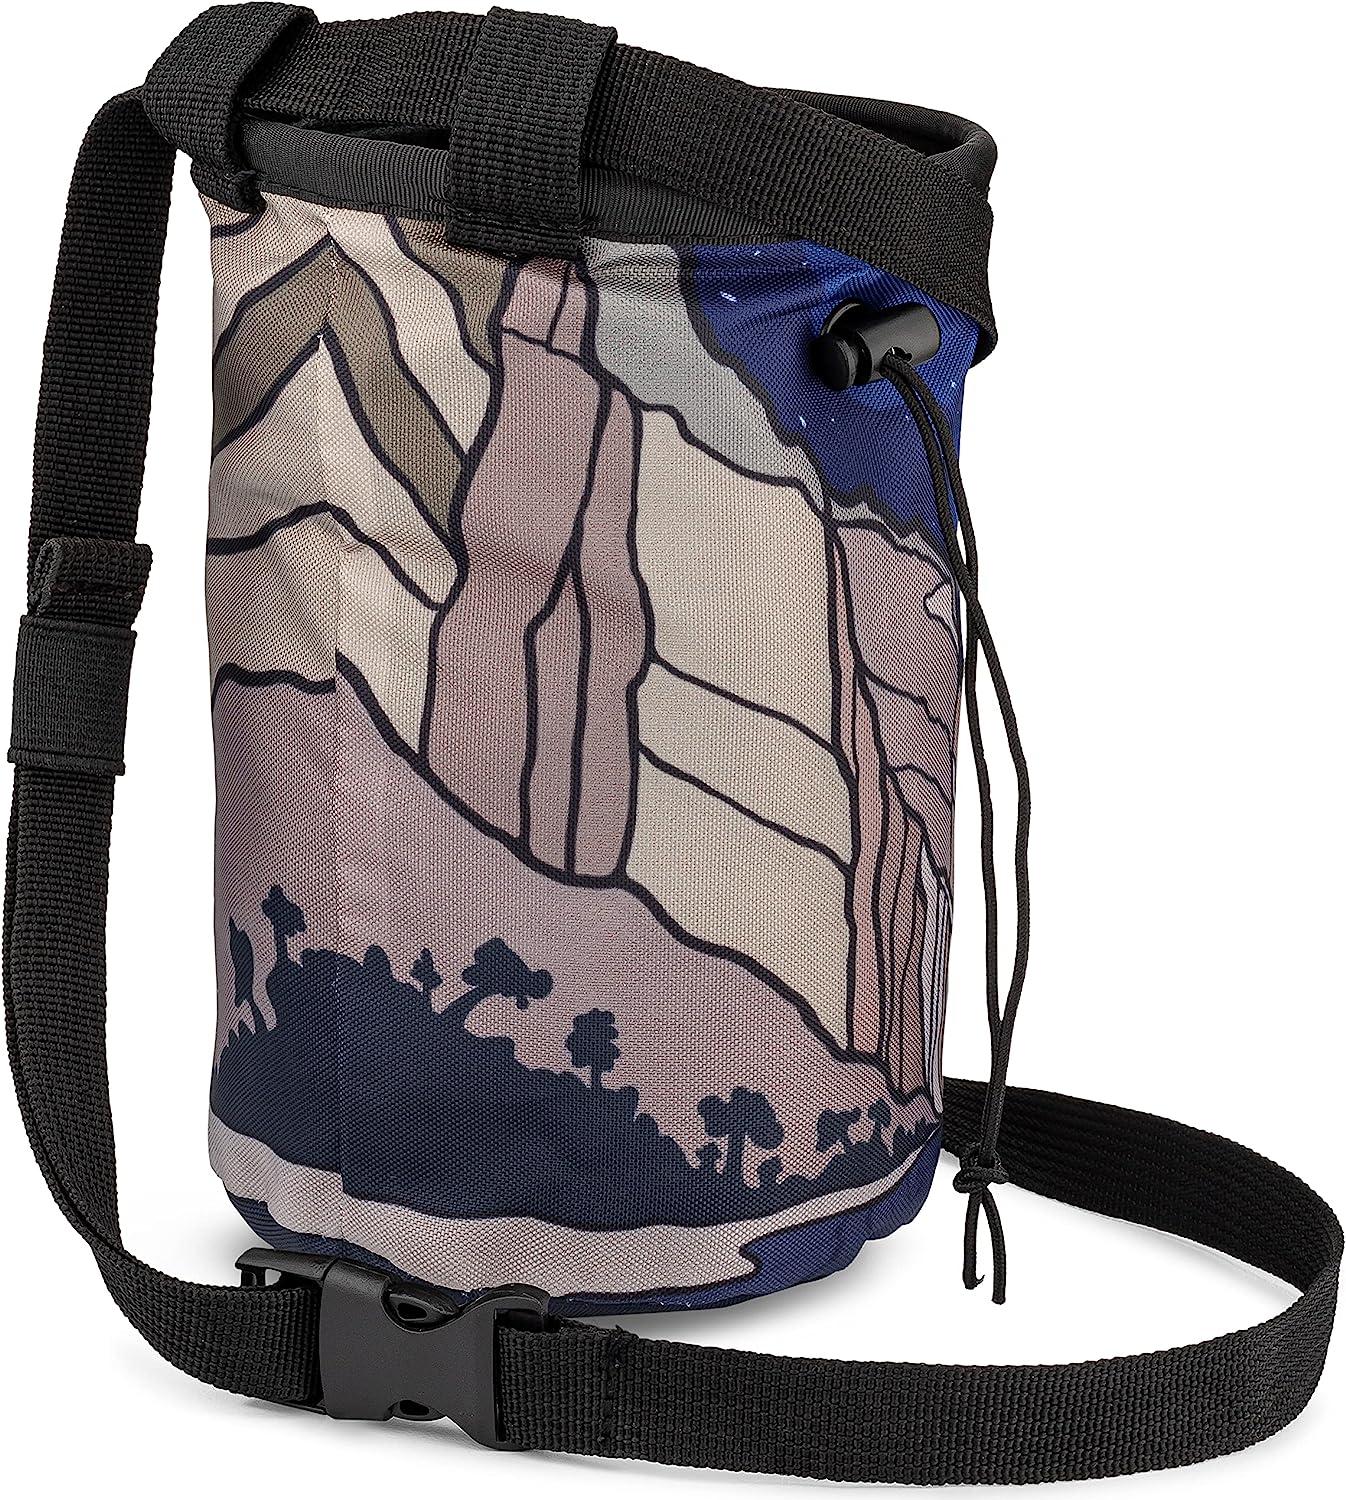 OSO Supply - Climbing Chalk Bag For Adults And Kids, Drawstring Closure, Adjustable Quick Clip Waist Belt, Indoor/Outdoor Training Equipment, Rock